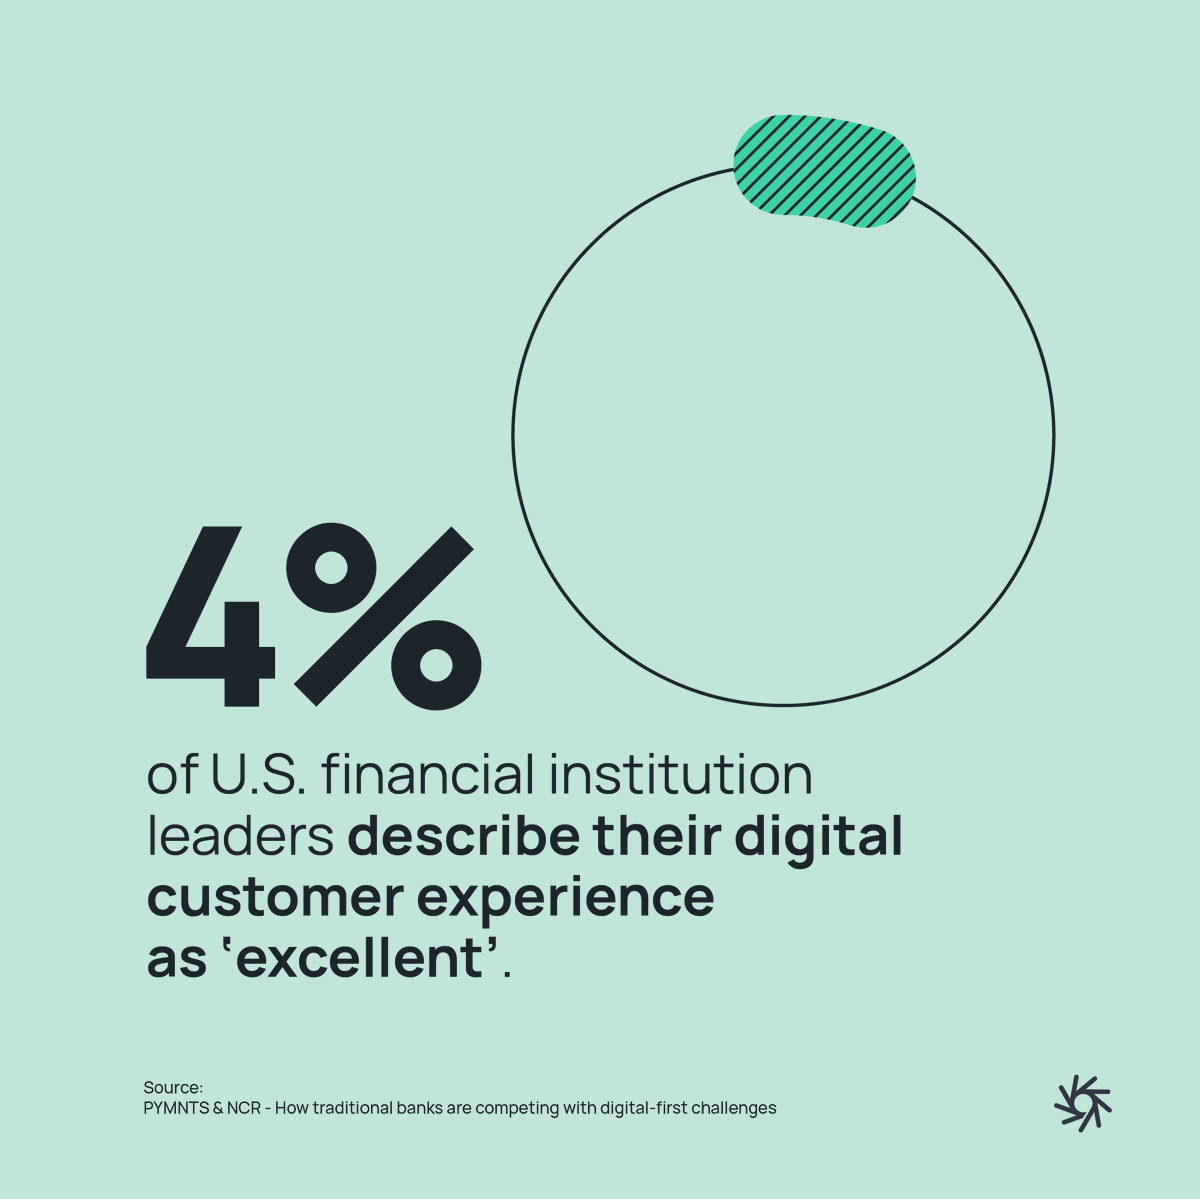 Research by PYMNTS found a mere 4% of banking experiences are excellent. This increases the difficulty for banks to compete with digital contenders who’ve recently entered the market.